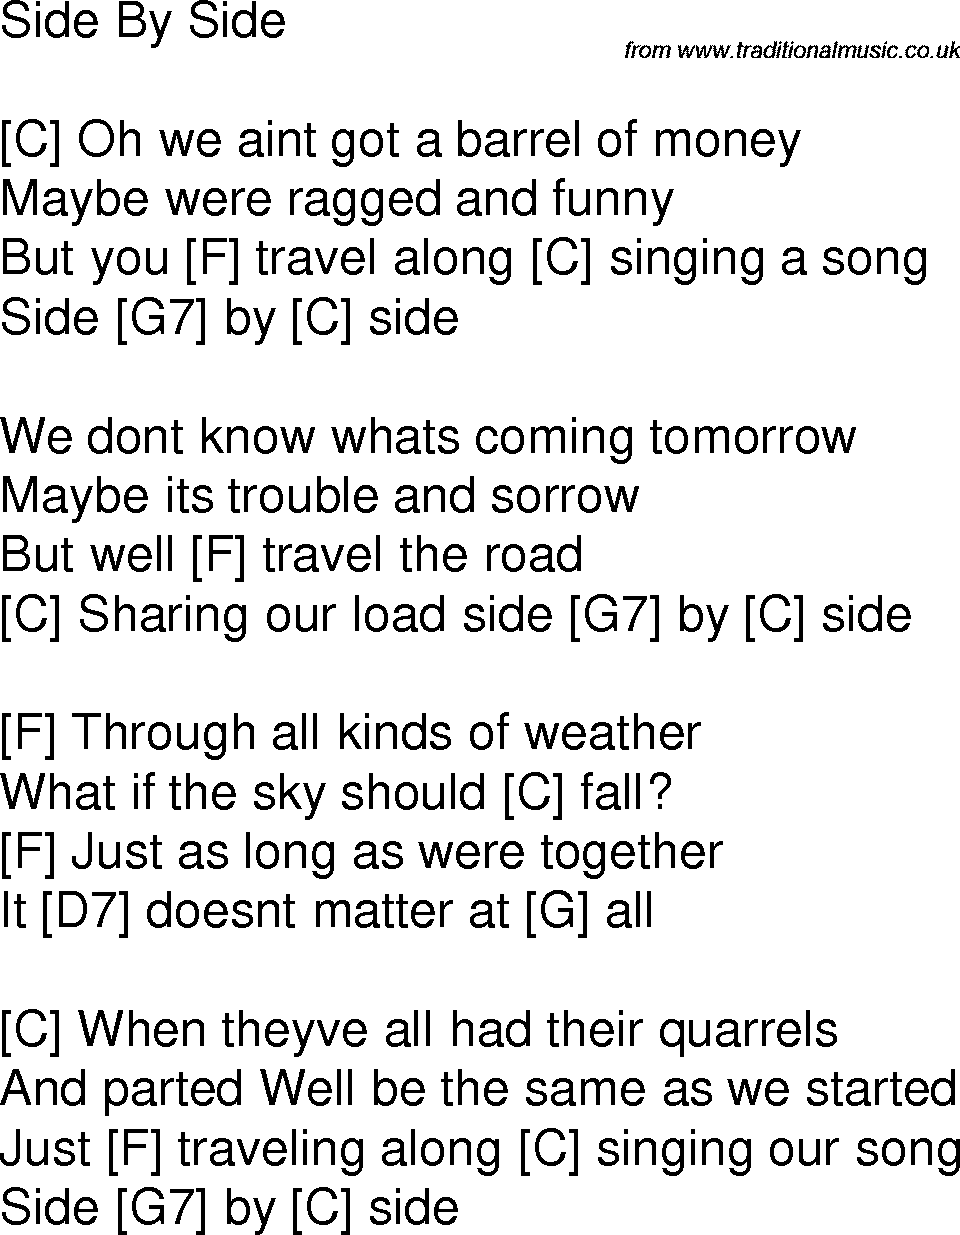 Old time song lyrics with chords for Side By Side C